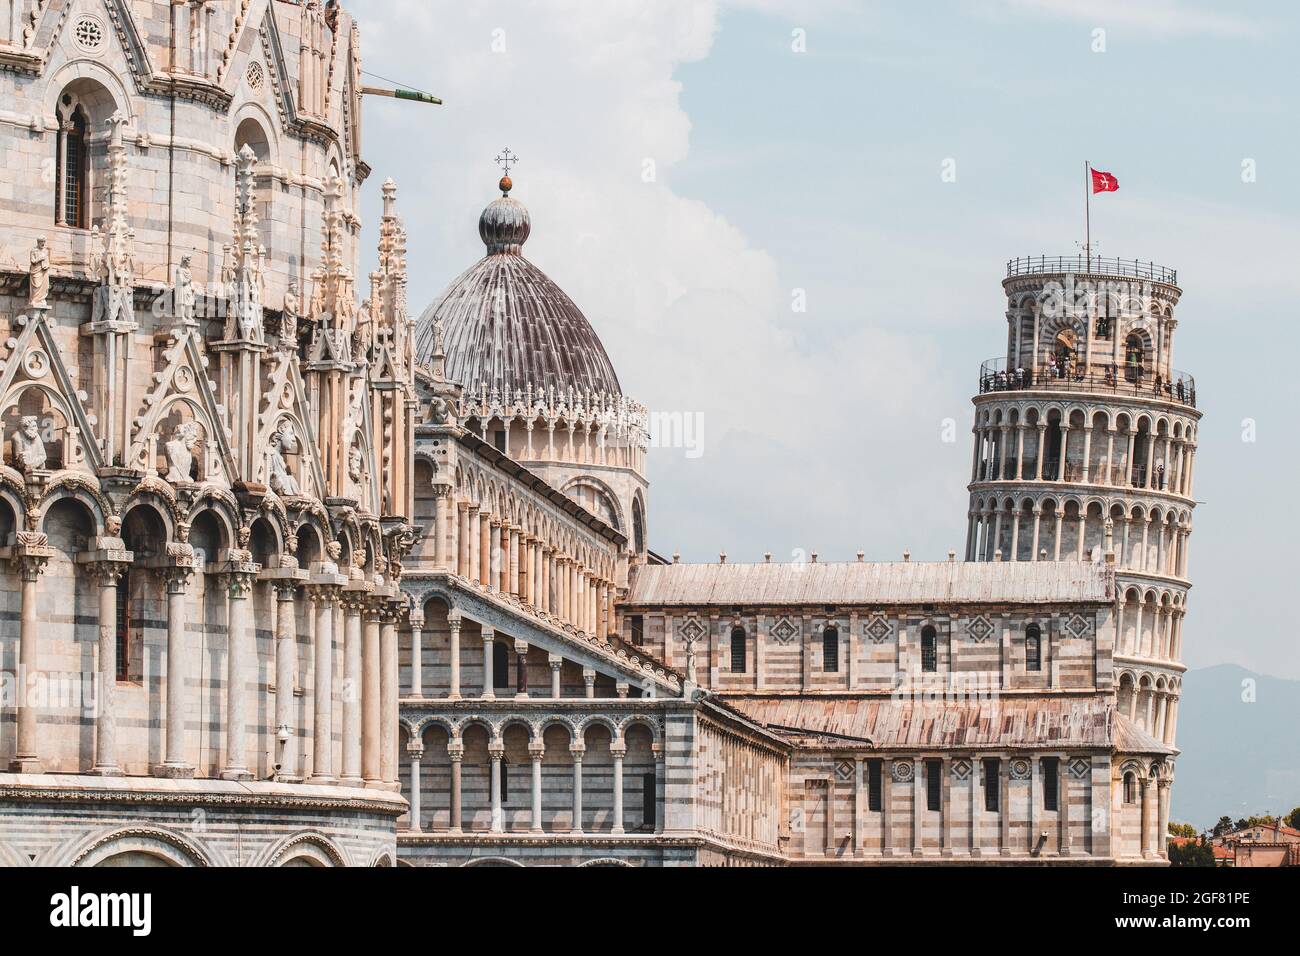 Piazza dei Miracoli, the leaning tower of Pisa Stock Photo